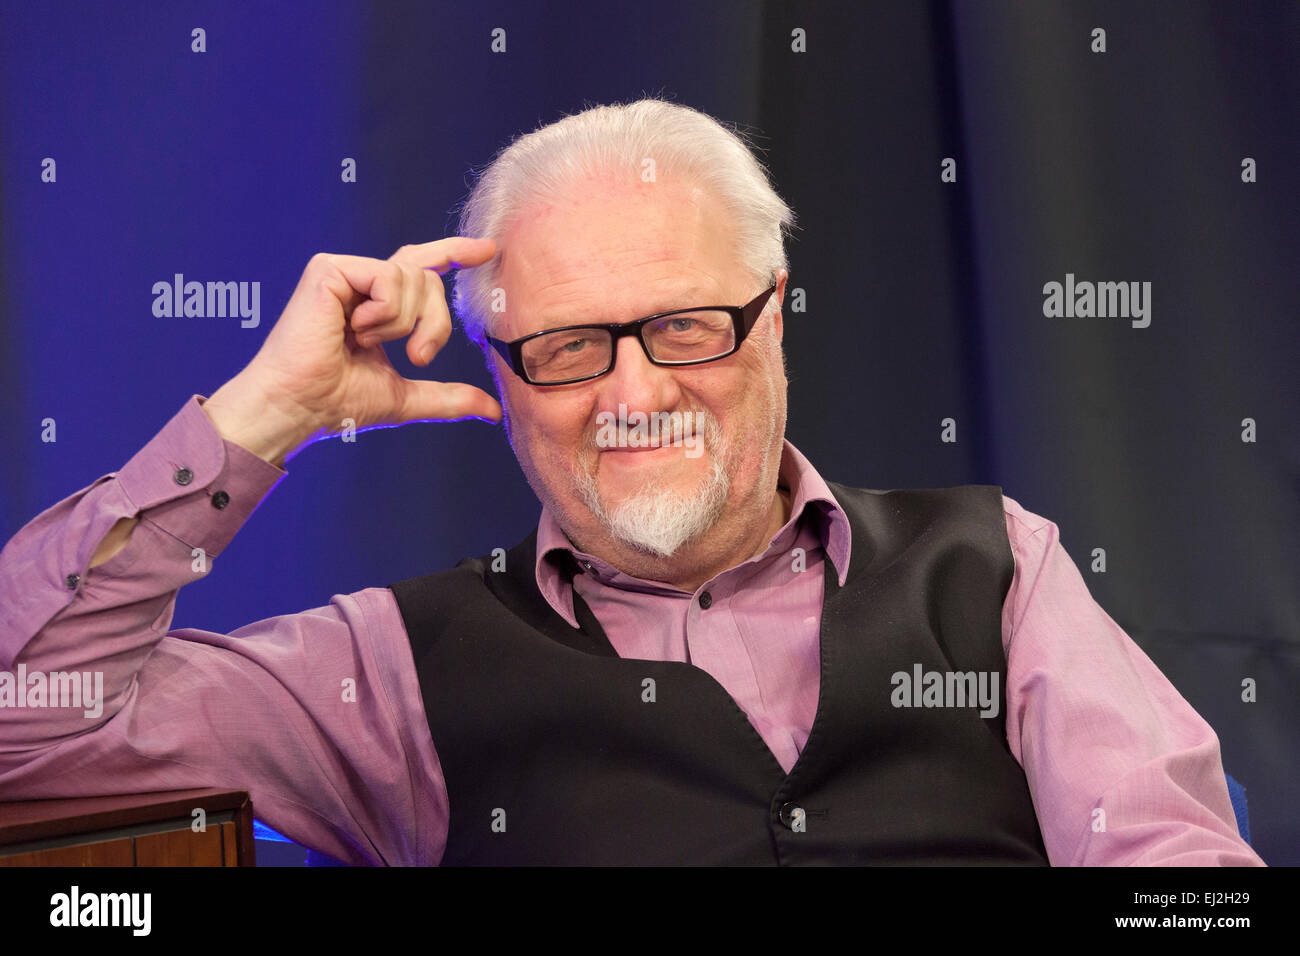 Walsall, West Midlands, UK. 20 March 2015. Dick Fiddy British Film Institute (BFI) writer and researcher at a recording of ‘The David Hamilton Show’ for Big Centre TV. Hosted by presenter and broadcaster ‘Diddy’ David Hamilton the show features famous personalities from across the music and television spectrum. Credit:  John Henshall / Alamy Live News PER0516 Stock Photo